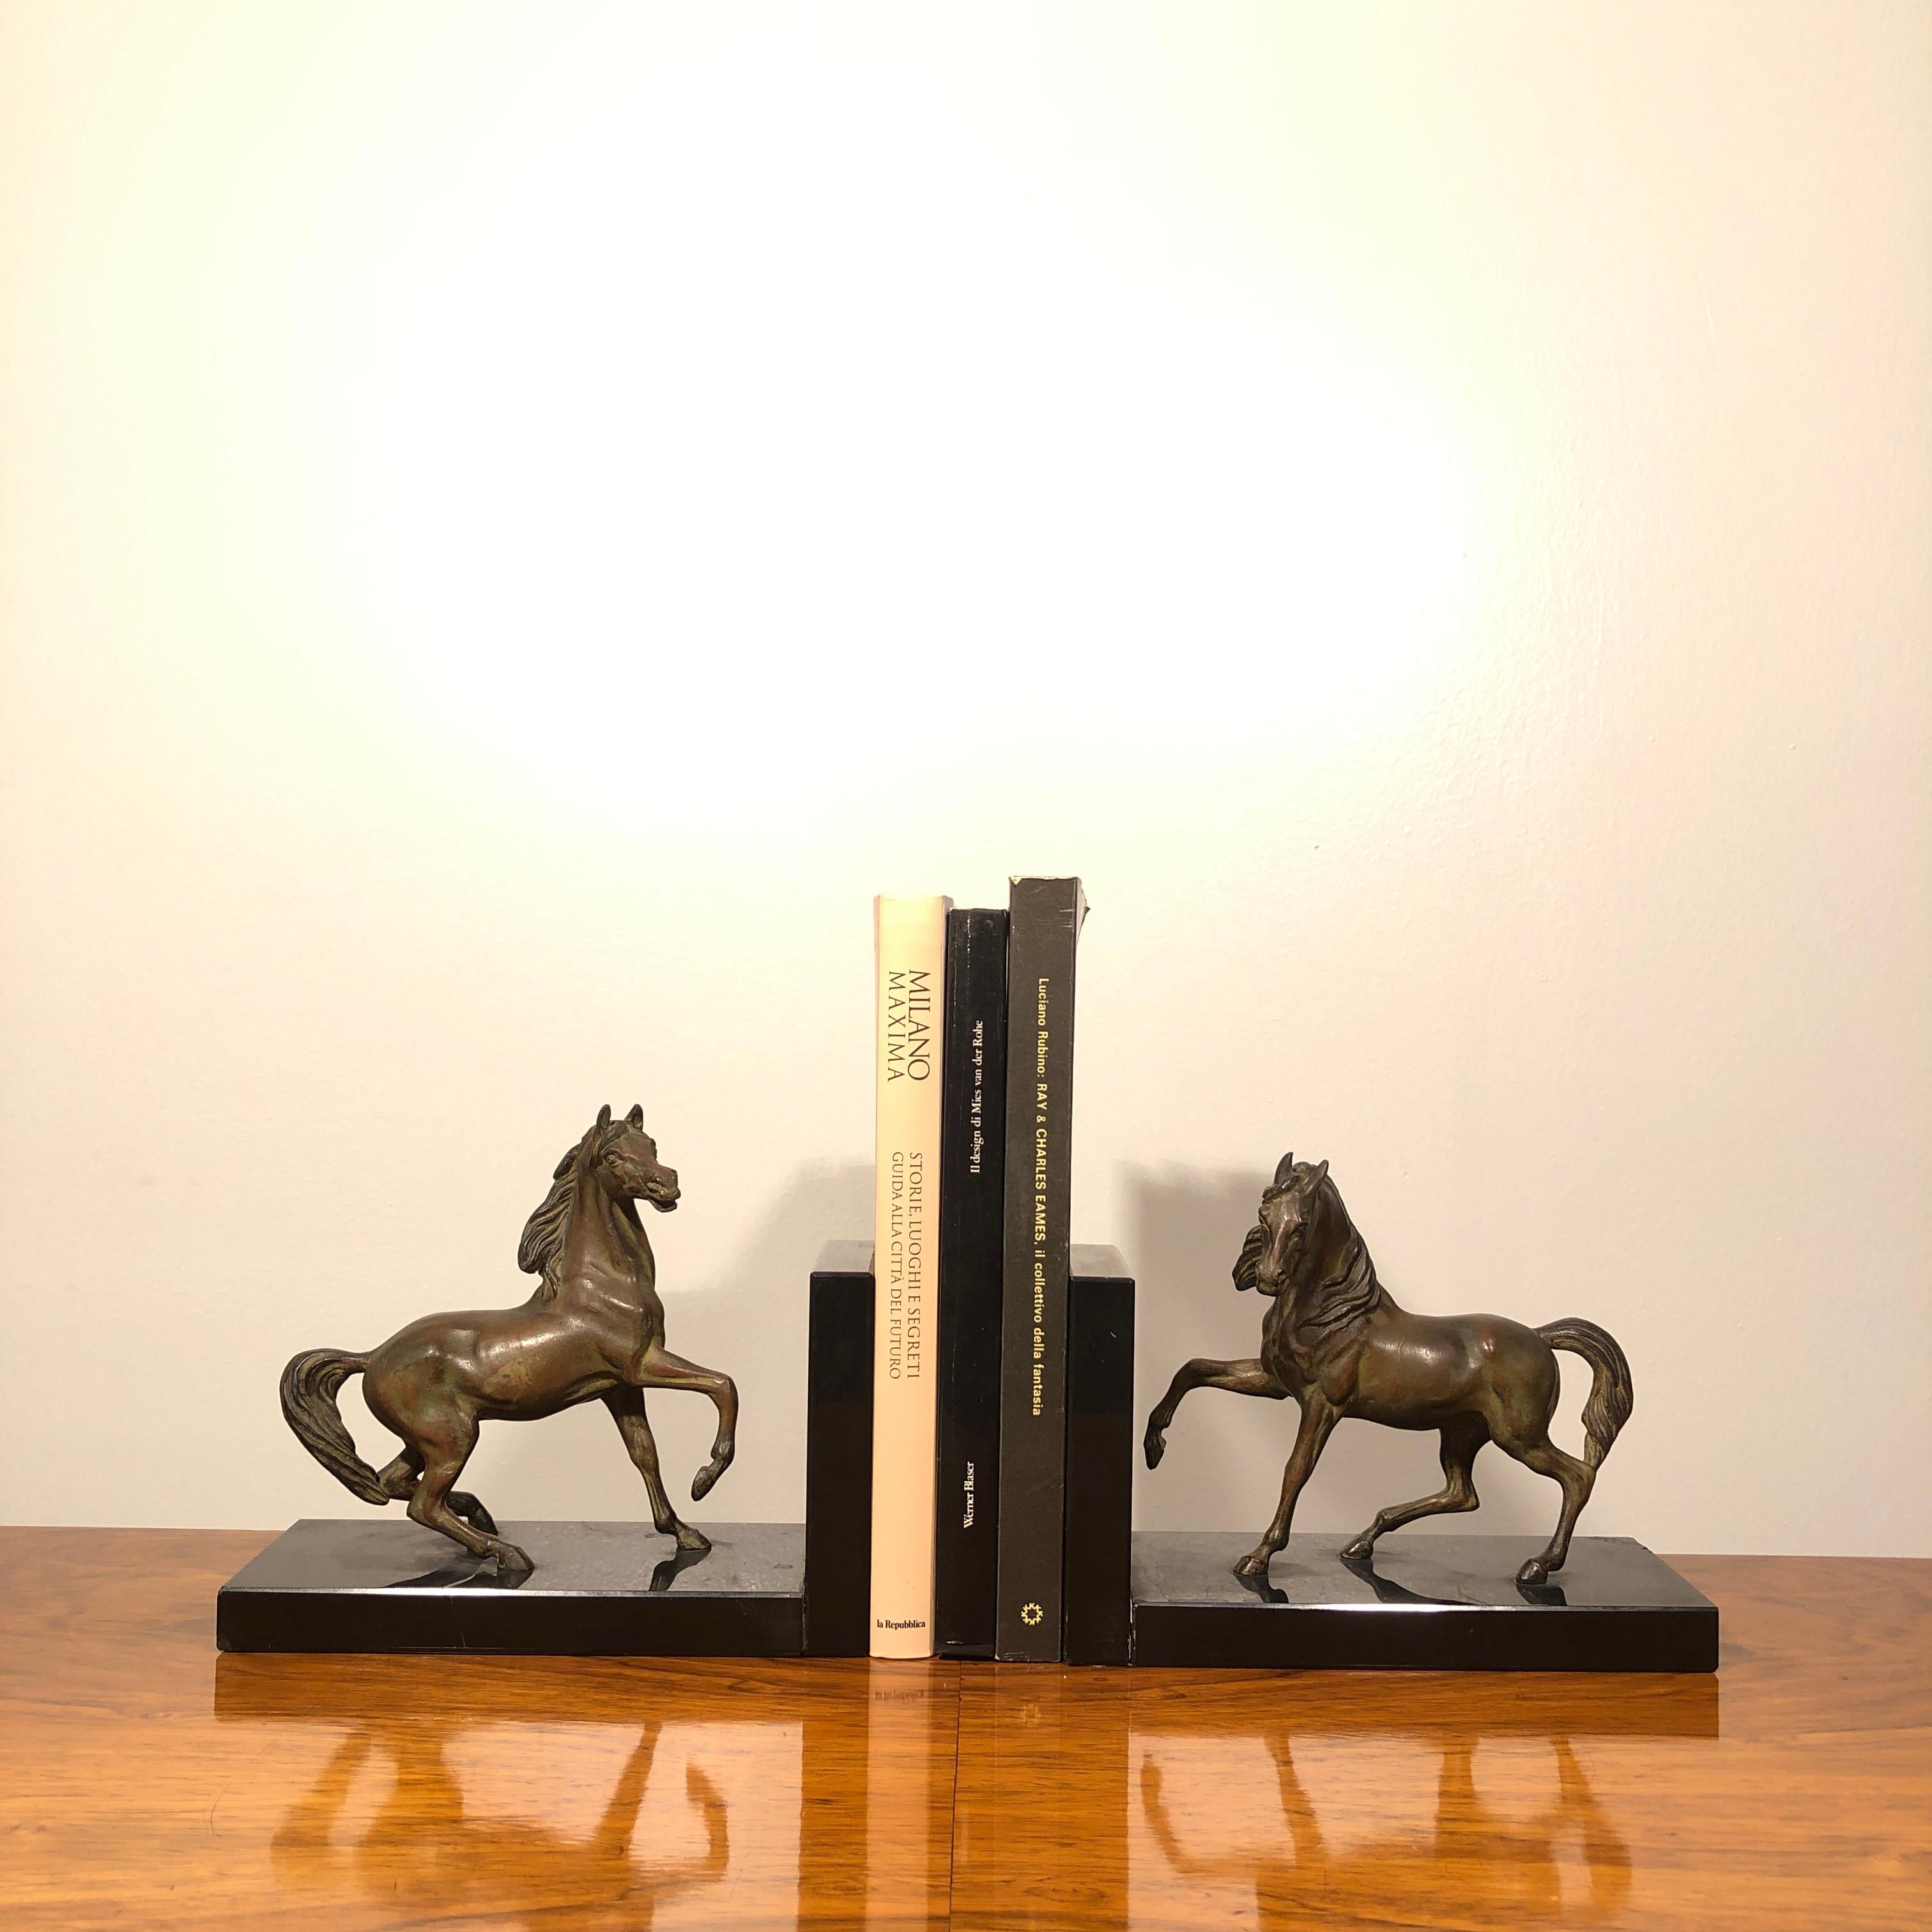 Art Deco horses shaped bronze and black marble bookends. From France from early 20th century period.
Size of each piece: W 20 cm, D 8 cm, H 12 cm.
Excellent conditions, no structural damages only wears coherent with prior gentle use and